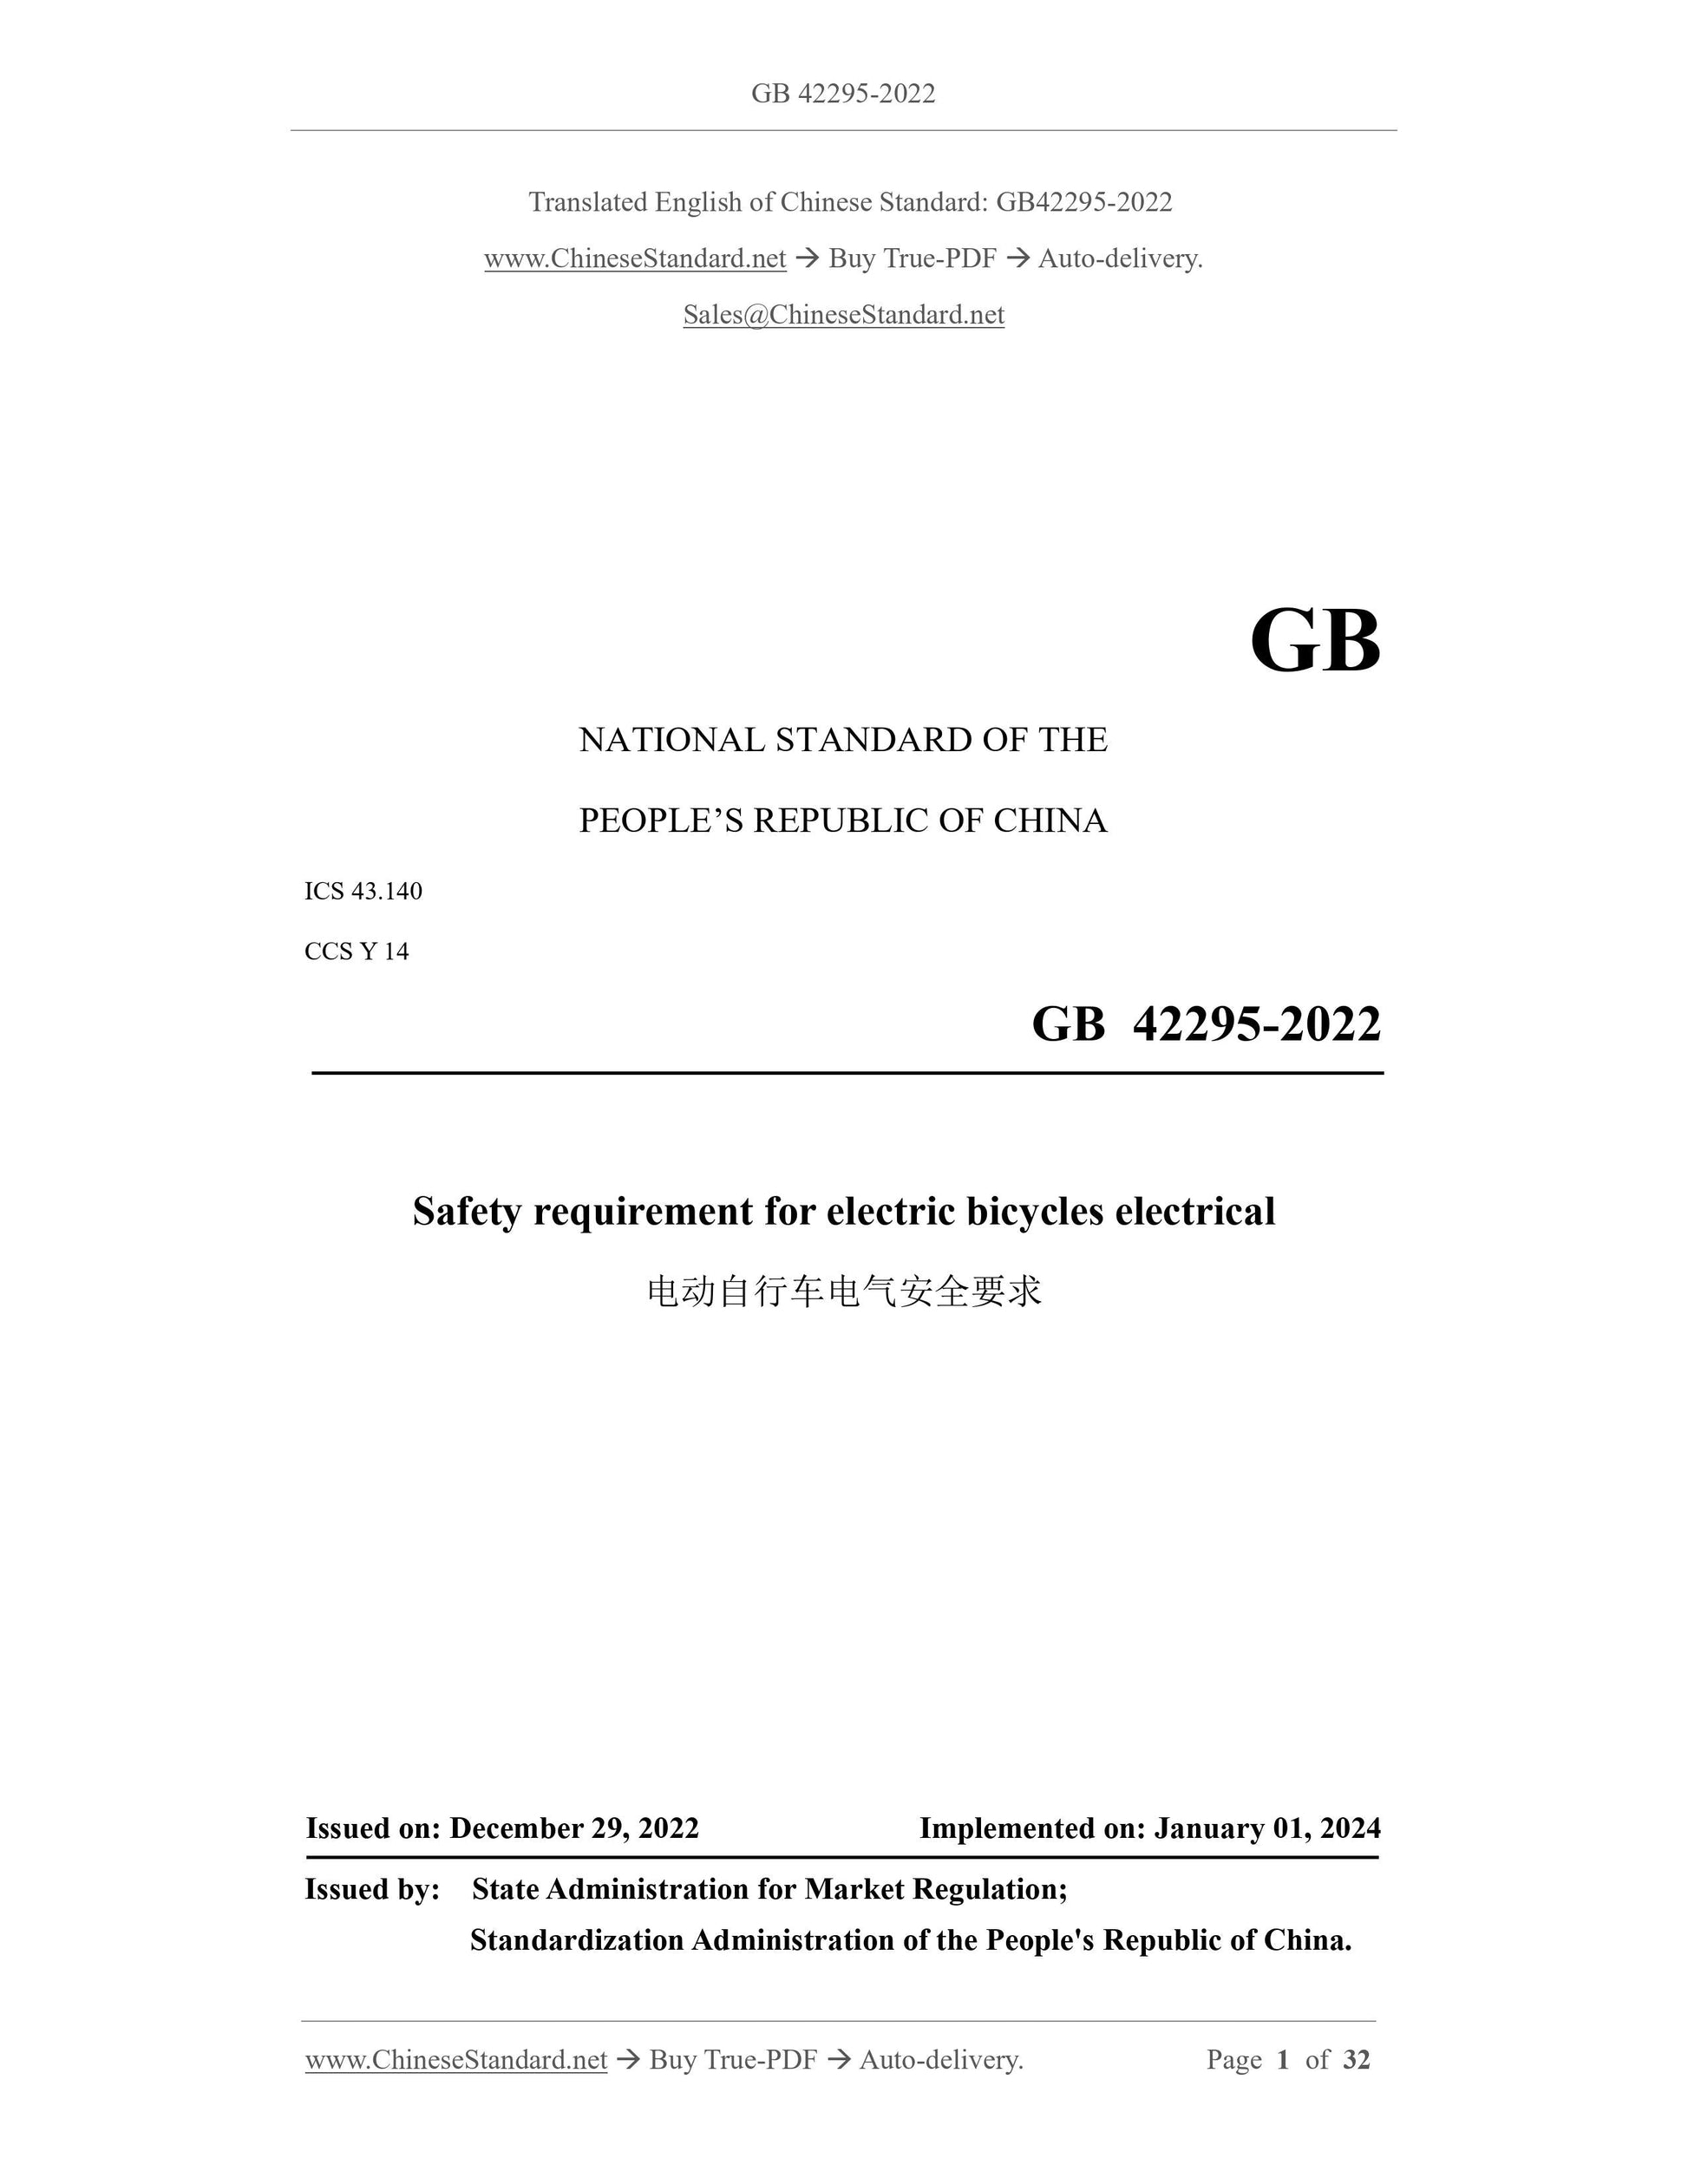 GB 42295-2022 Page 1